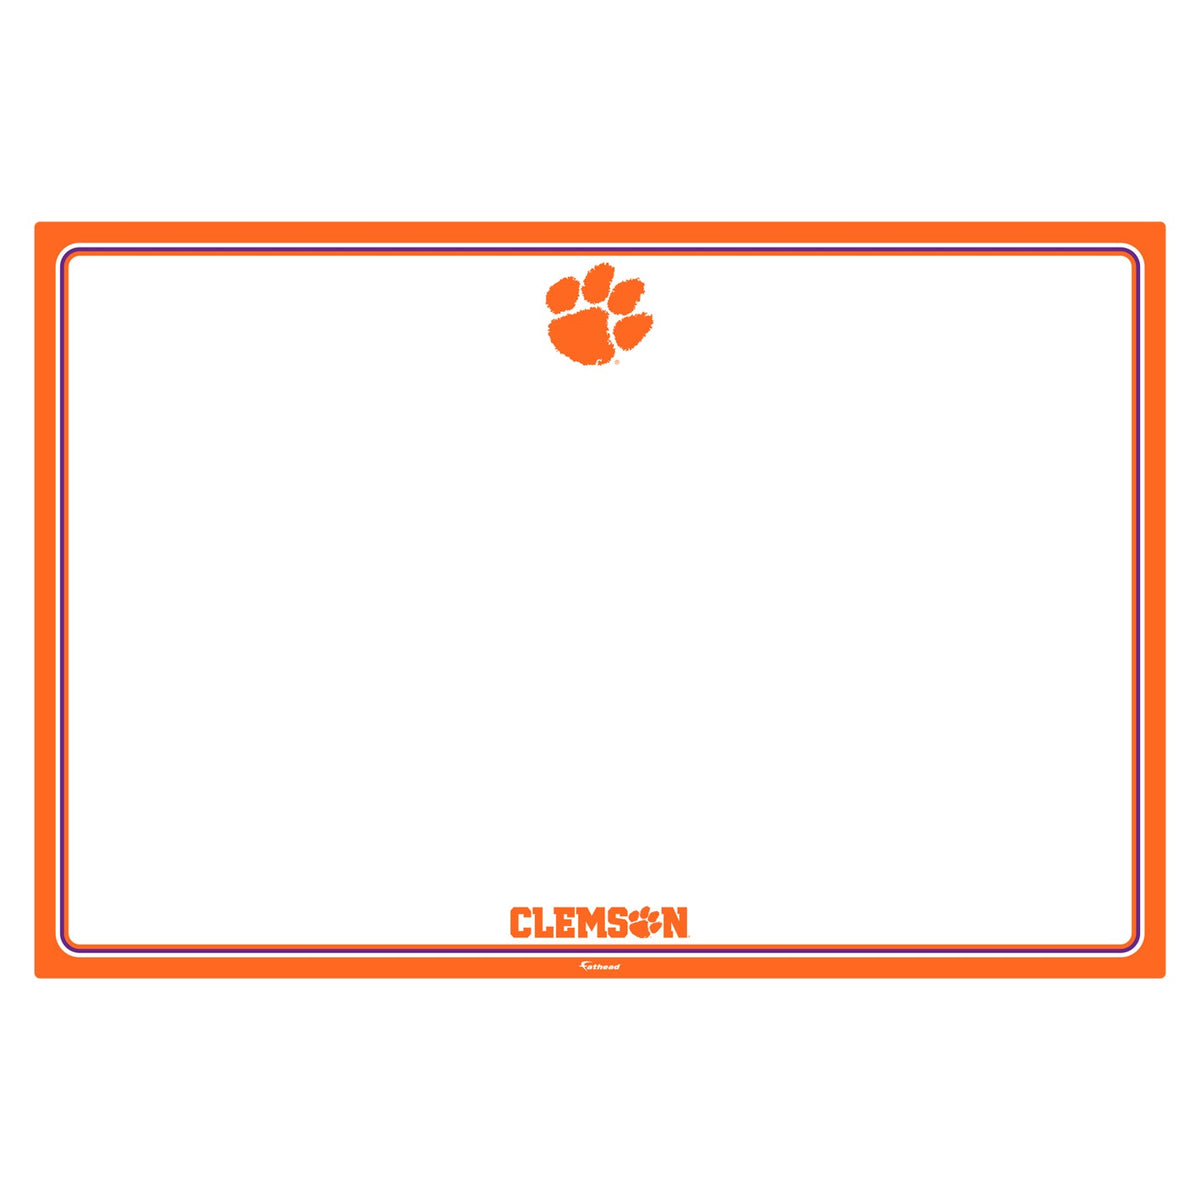 Clemson Tigers: Clemson Tigers  Dry Erase Whiteboard        - Officially Licensed NCAA Removable Wall   Adhesive Decal